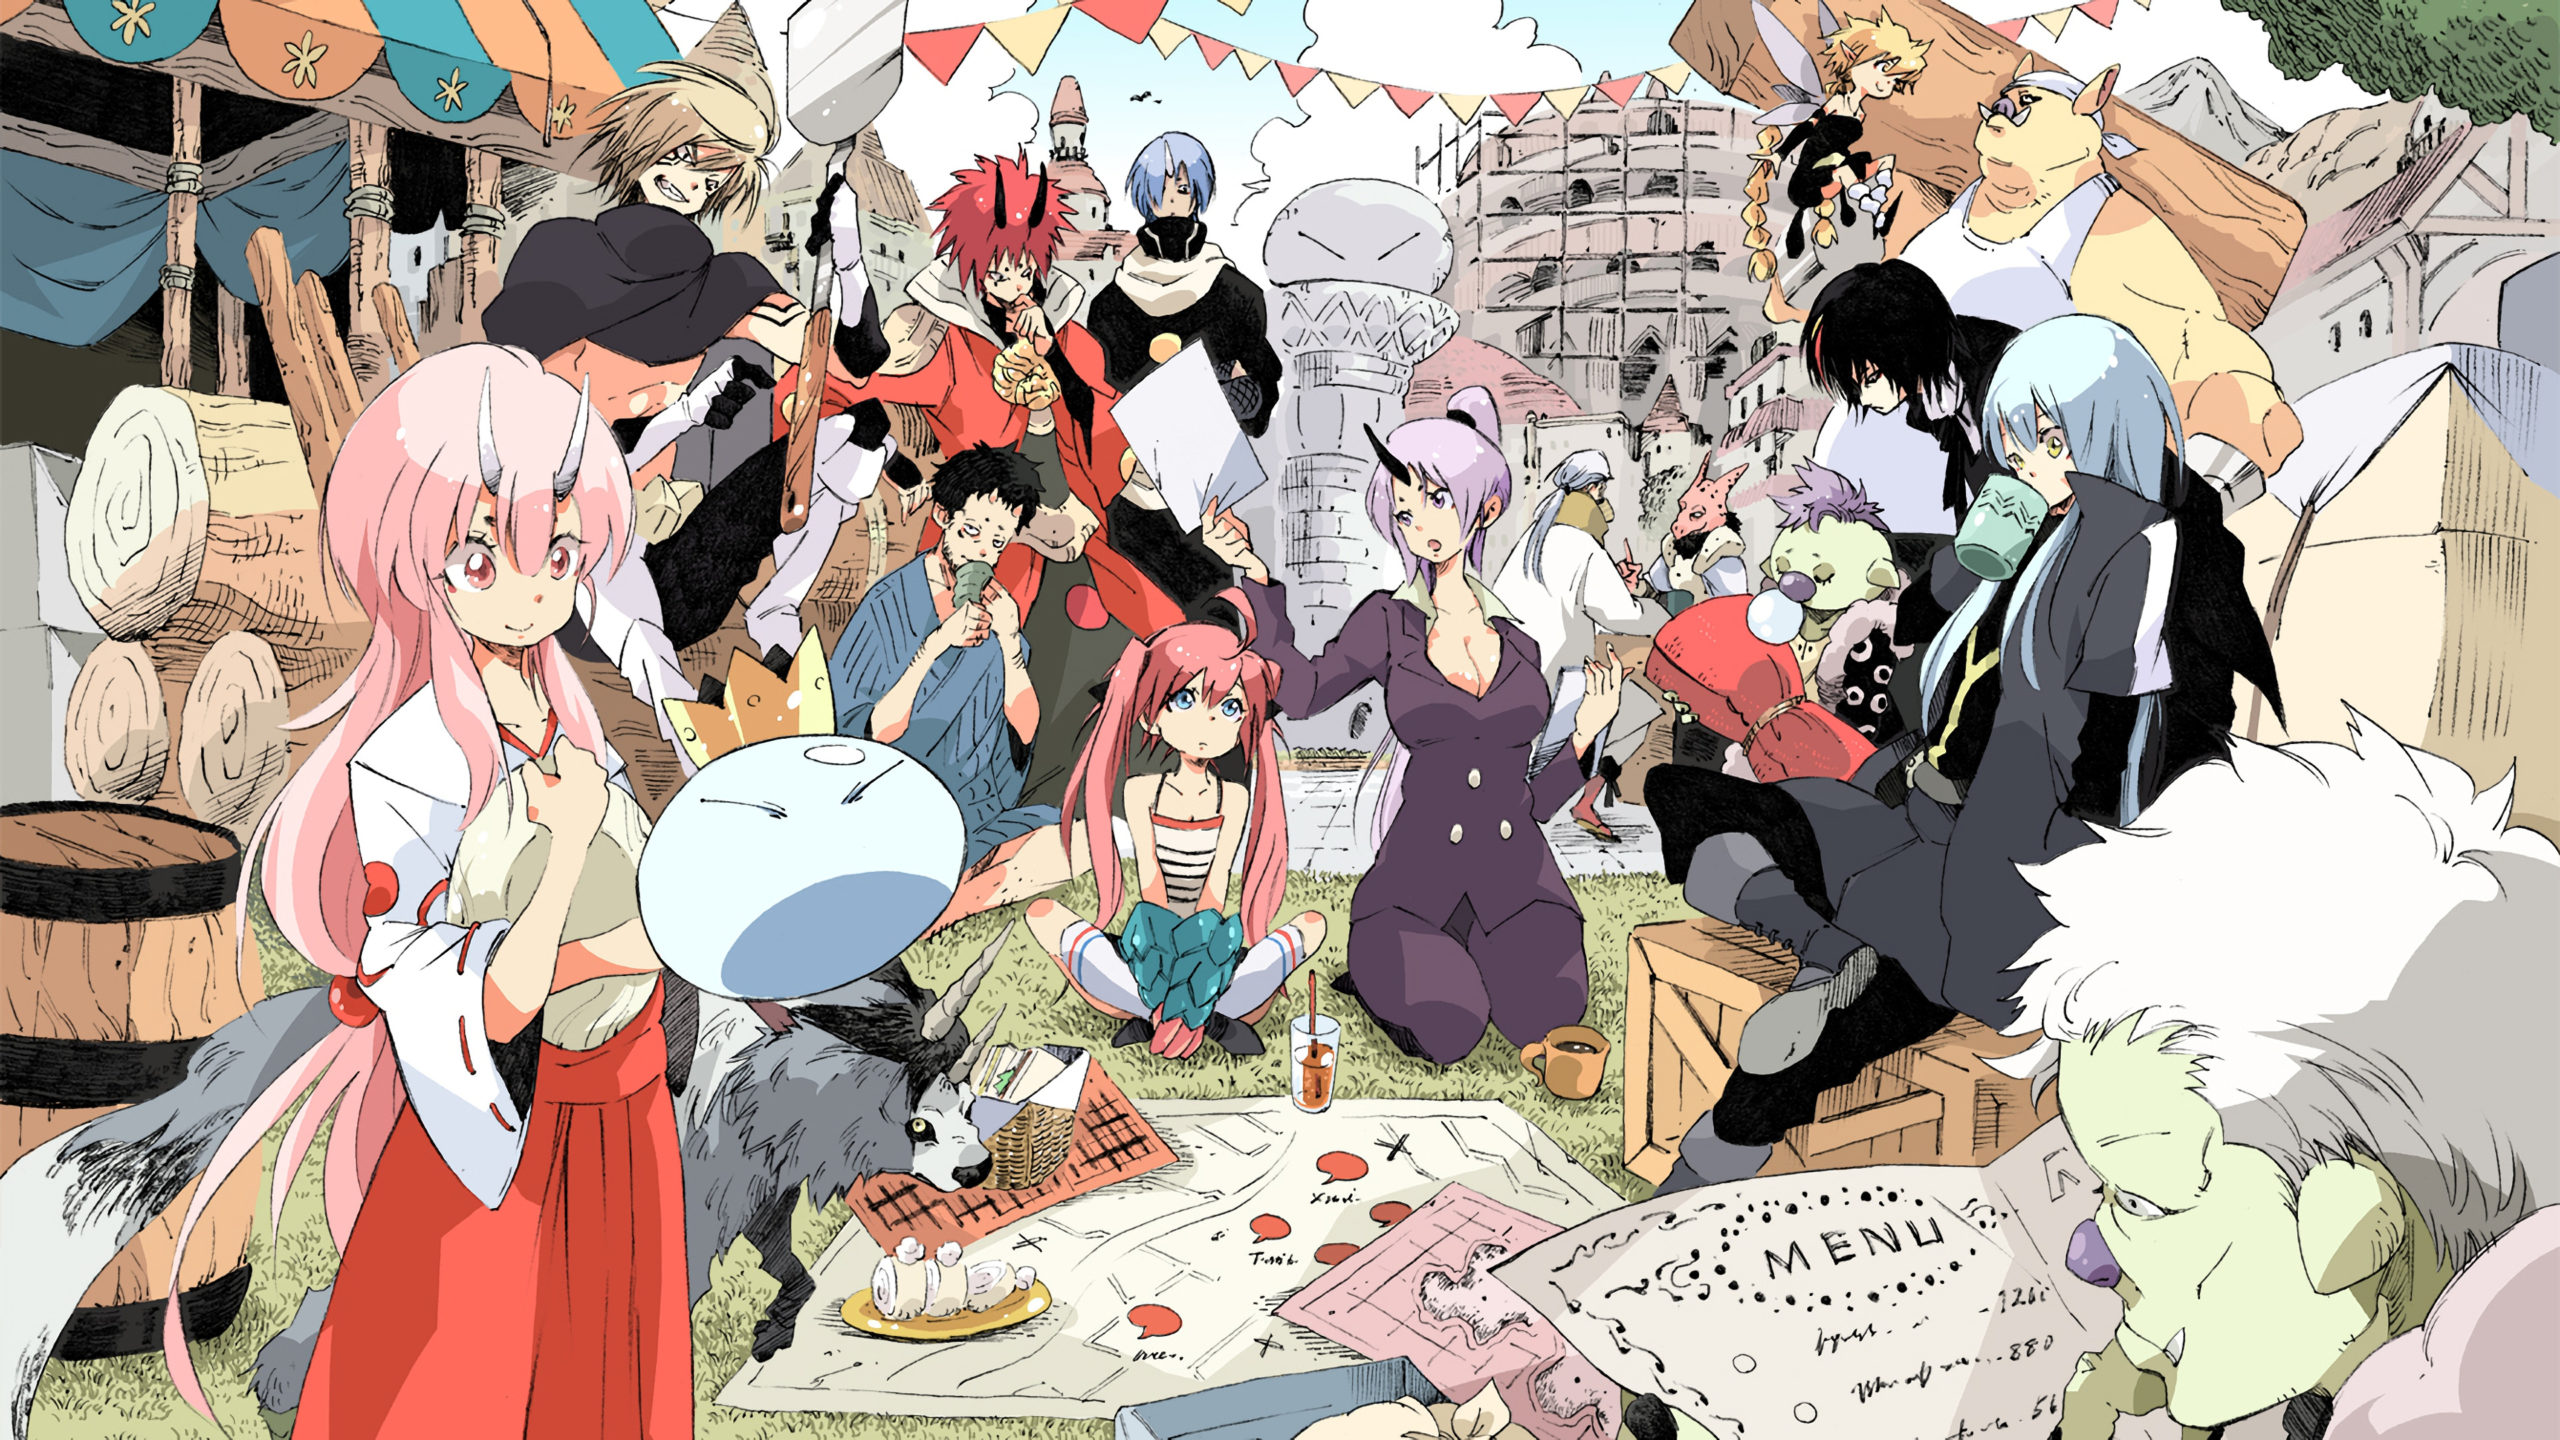 all the main characters in a frame of a market.